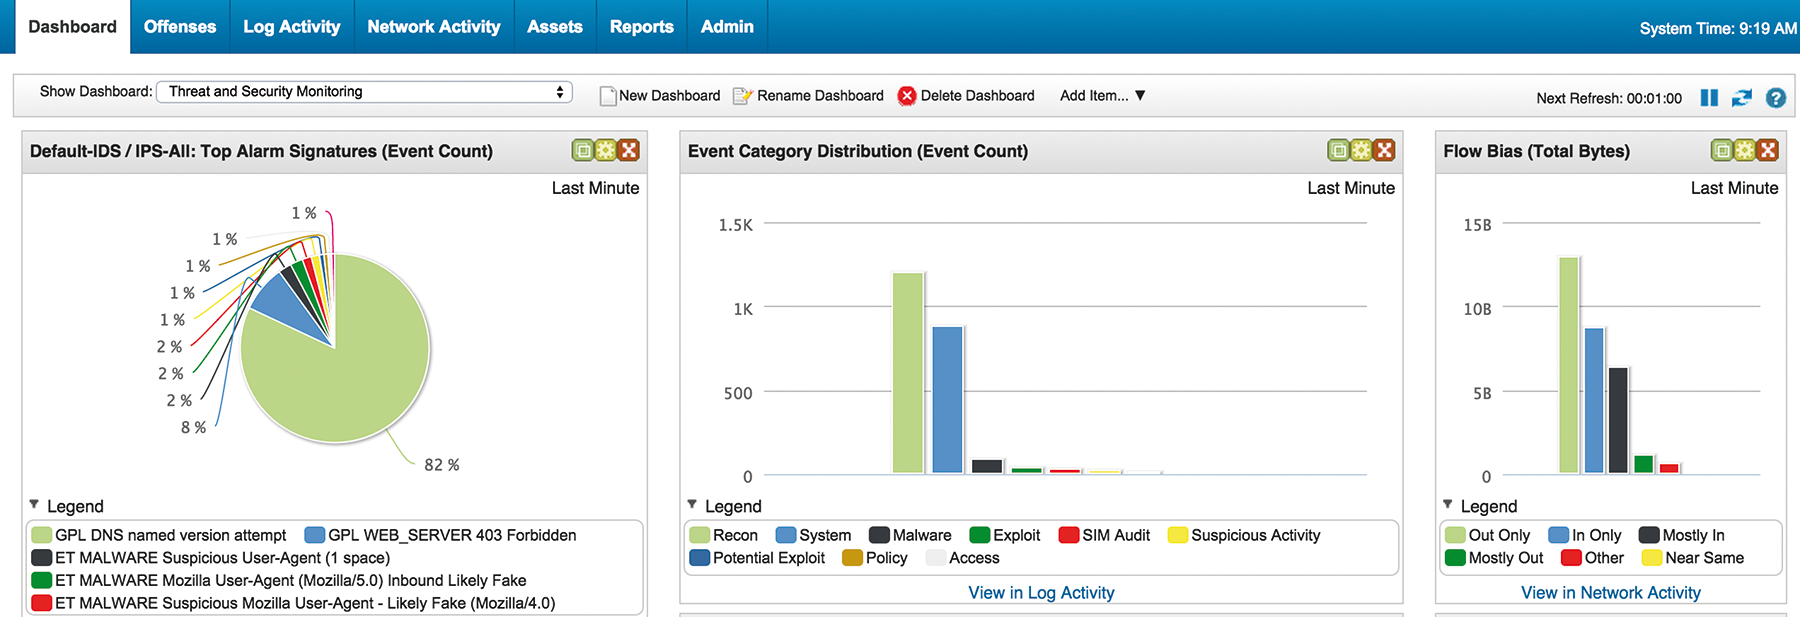 Typical SIEM dashboard view with a focus on monitored signatures. 